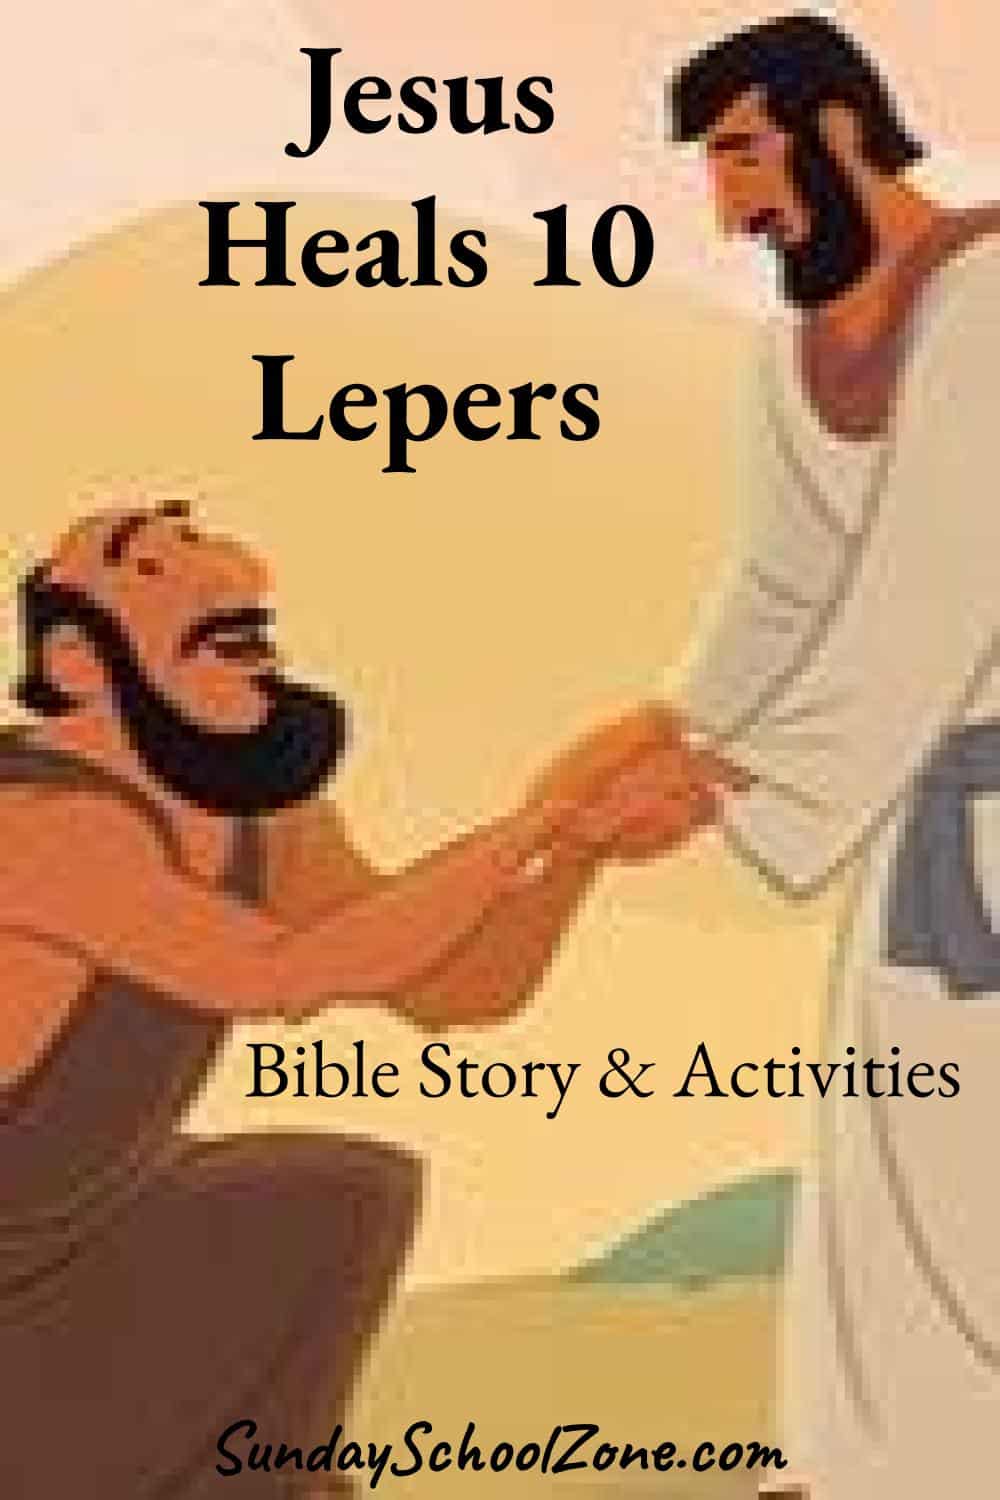 jesus lepers bible healed sunday activities children luke story them he heal asked